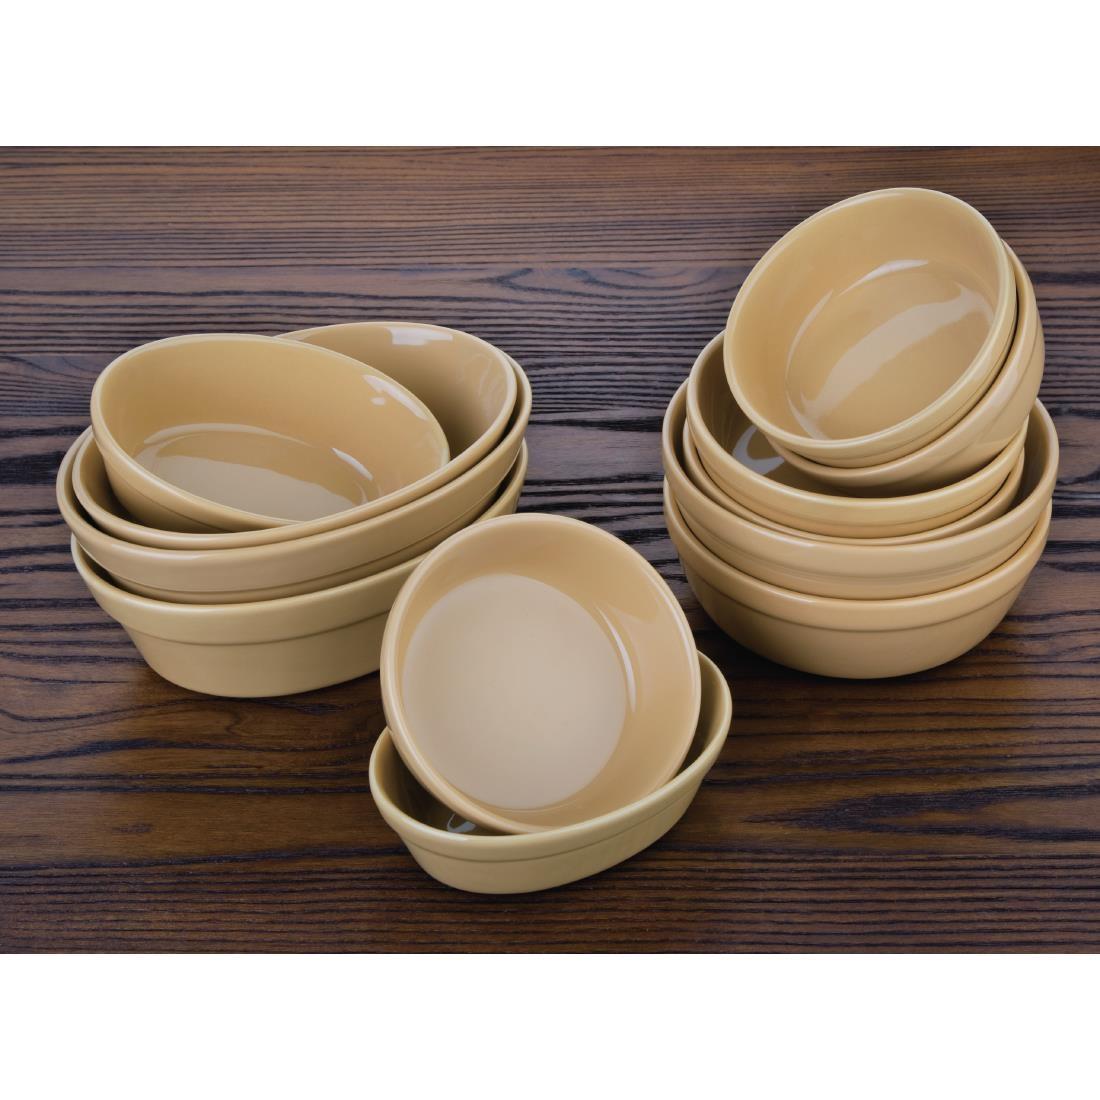 Olympia Stoneware Oval Pie Bowls 161 x 116mm (Pack of 6) - C108  - 4